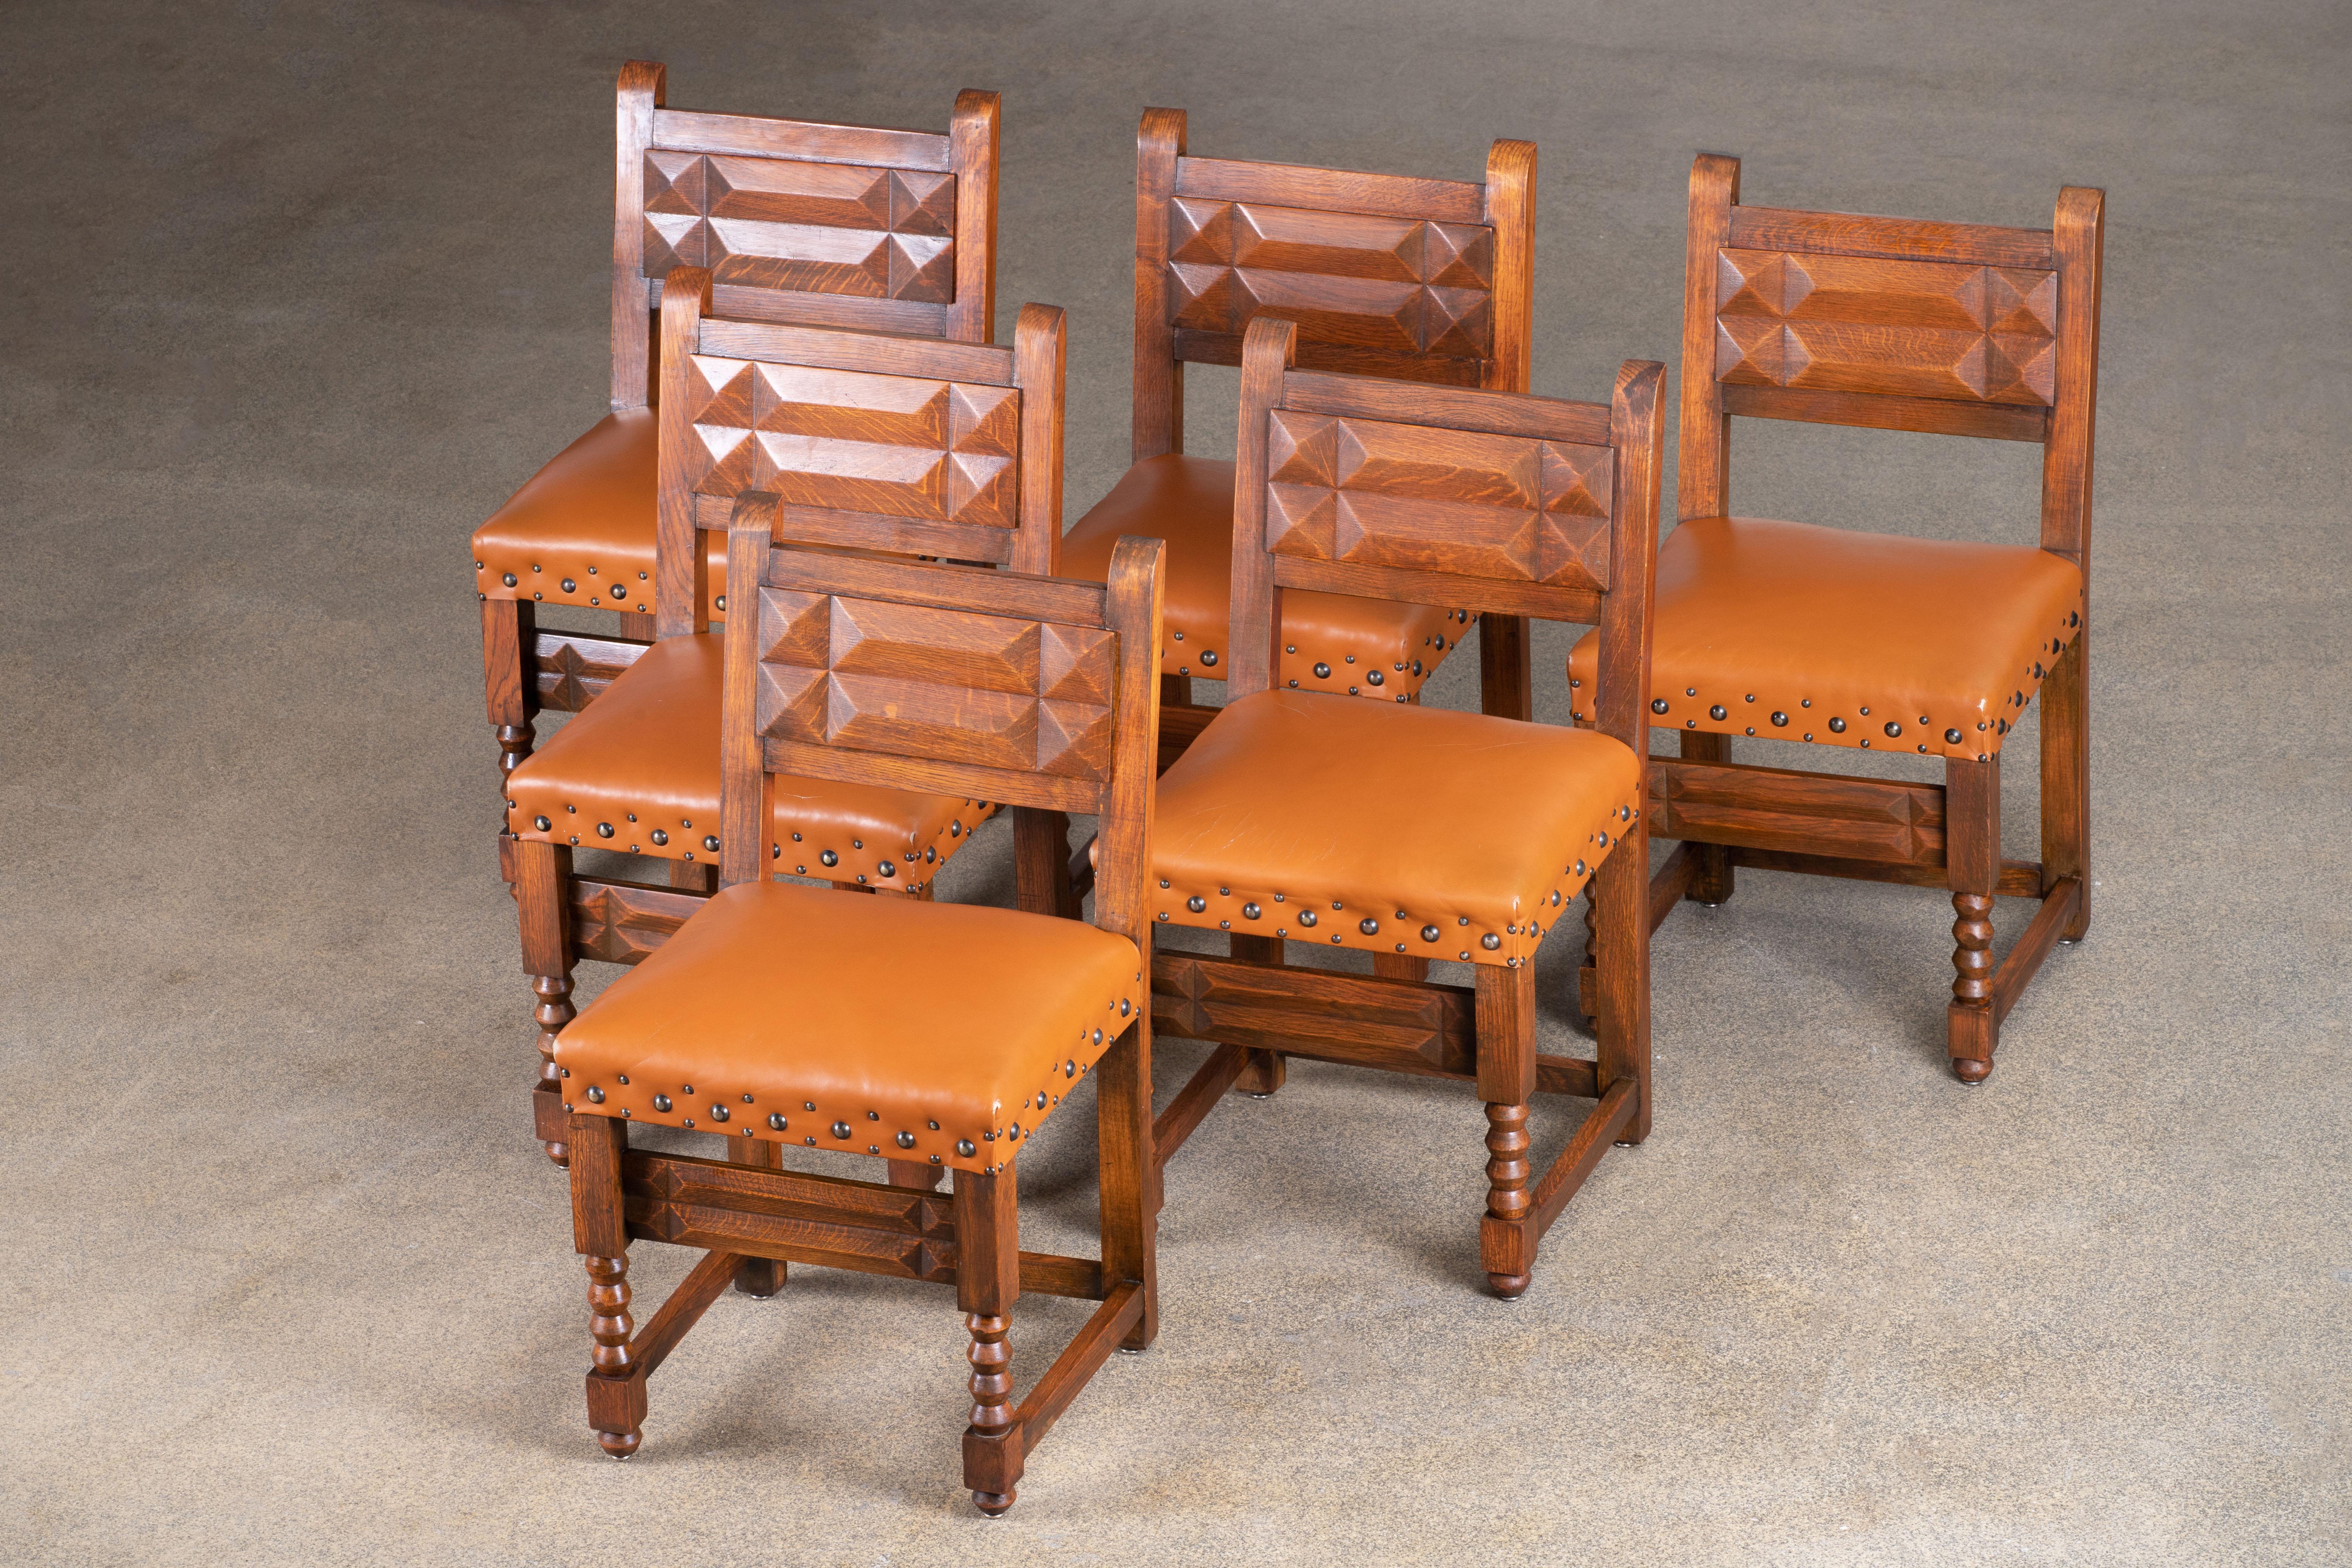 This set of six French Art Deco dining chairs in solid oak was created in the 1940s by Charles Dudouyt.

We can clearly see the work of the French school of the 1940s. The detailed and graphic designed backrest panels will meet the standards of